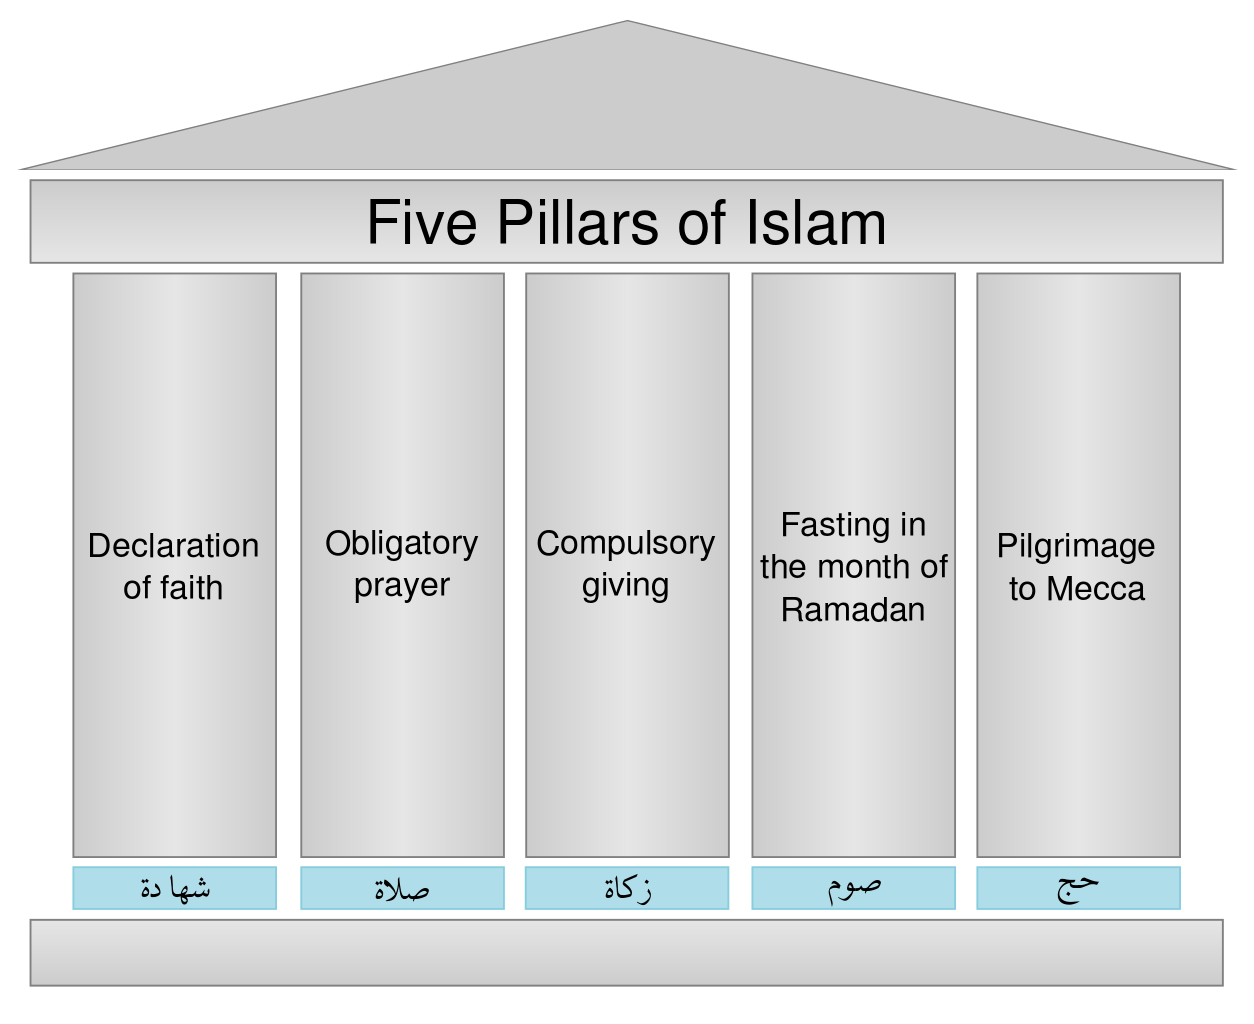 The image, representing the Five Pillars of Islam, is that of a house with each of the pillars holding up the roof of the building. The names of each of the five pillars are written on each column, both in English and Arabic.